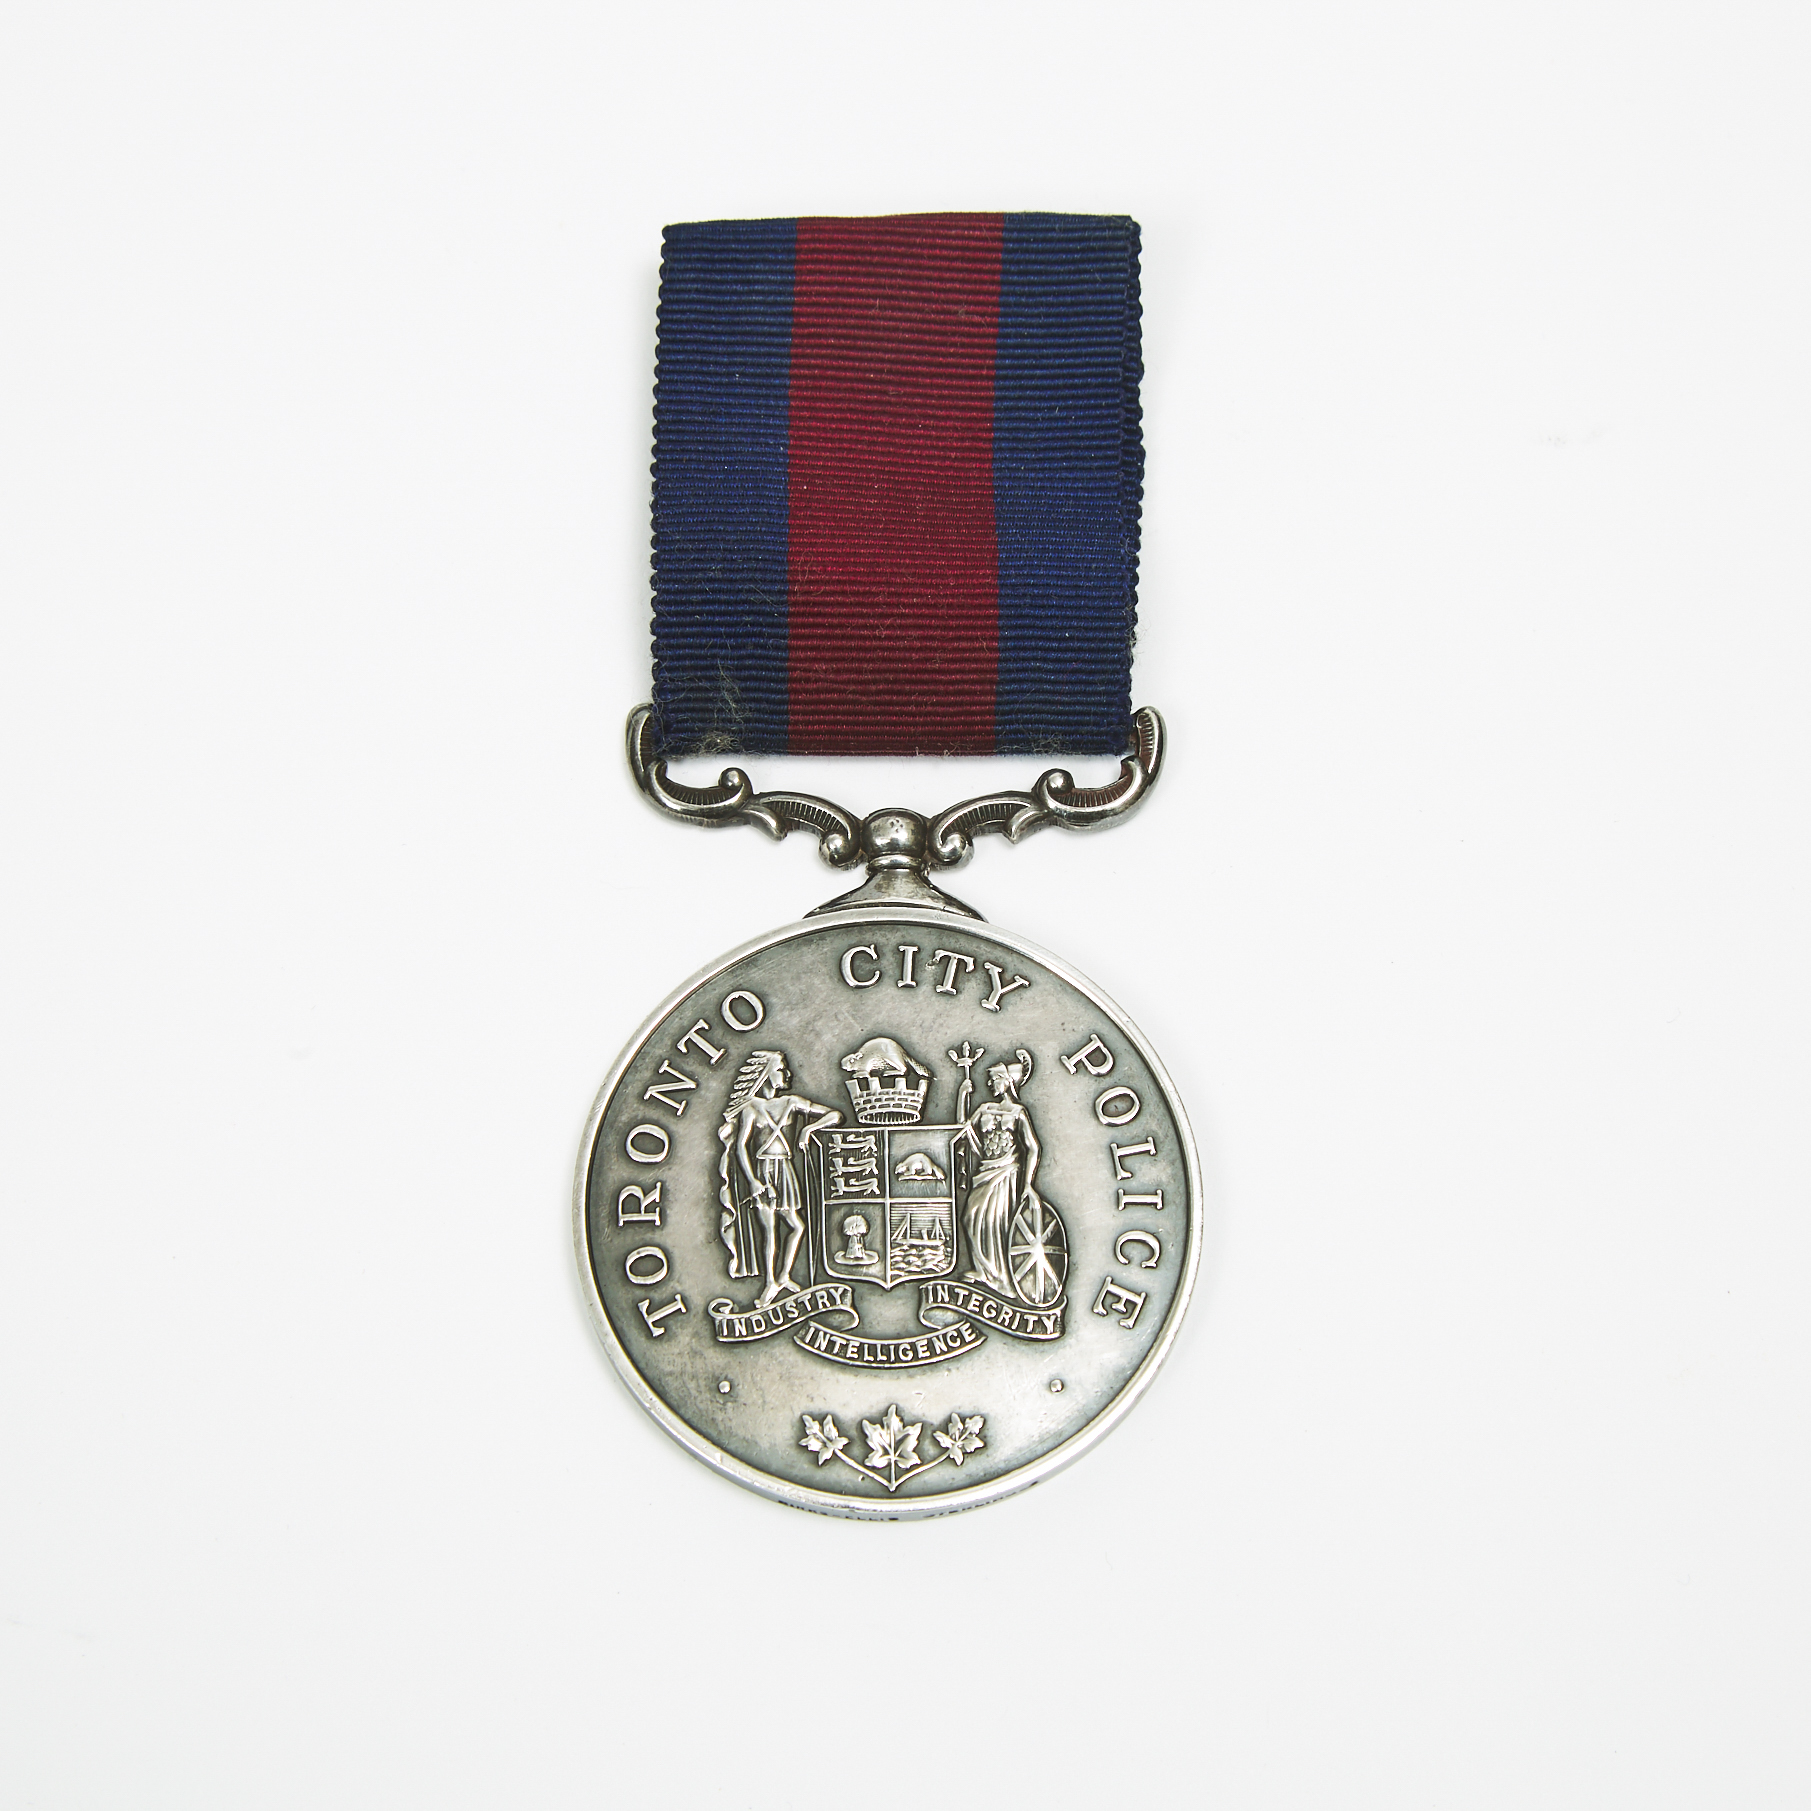 Toronto City Police Silver Distinguished Service Medal to Inspector Richard Pountney, 1906-1949